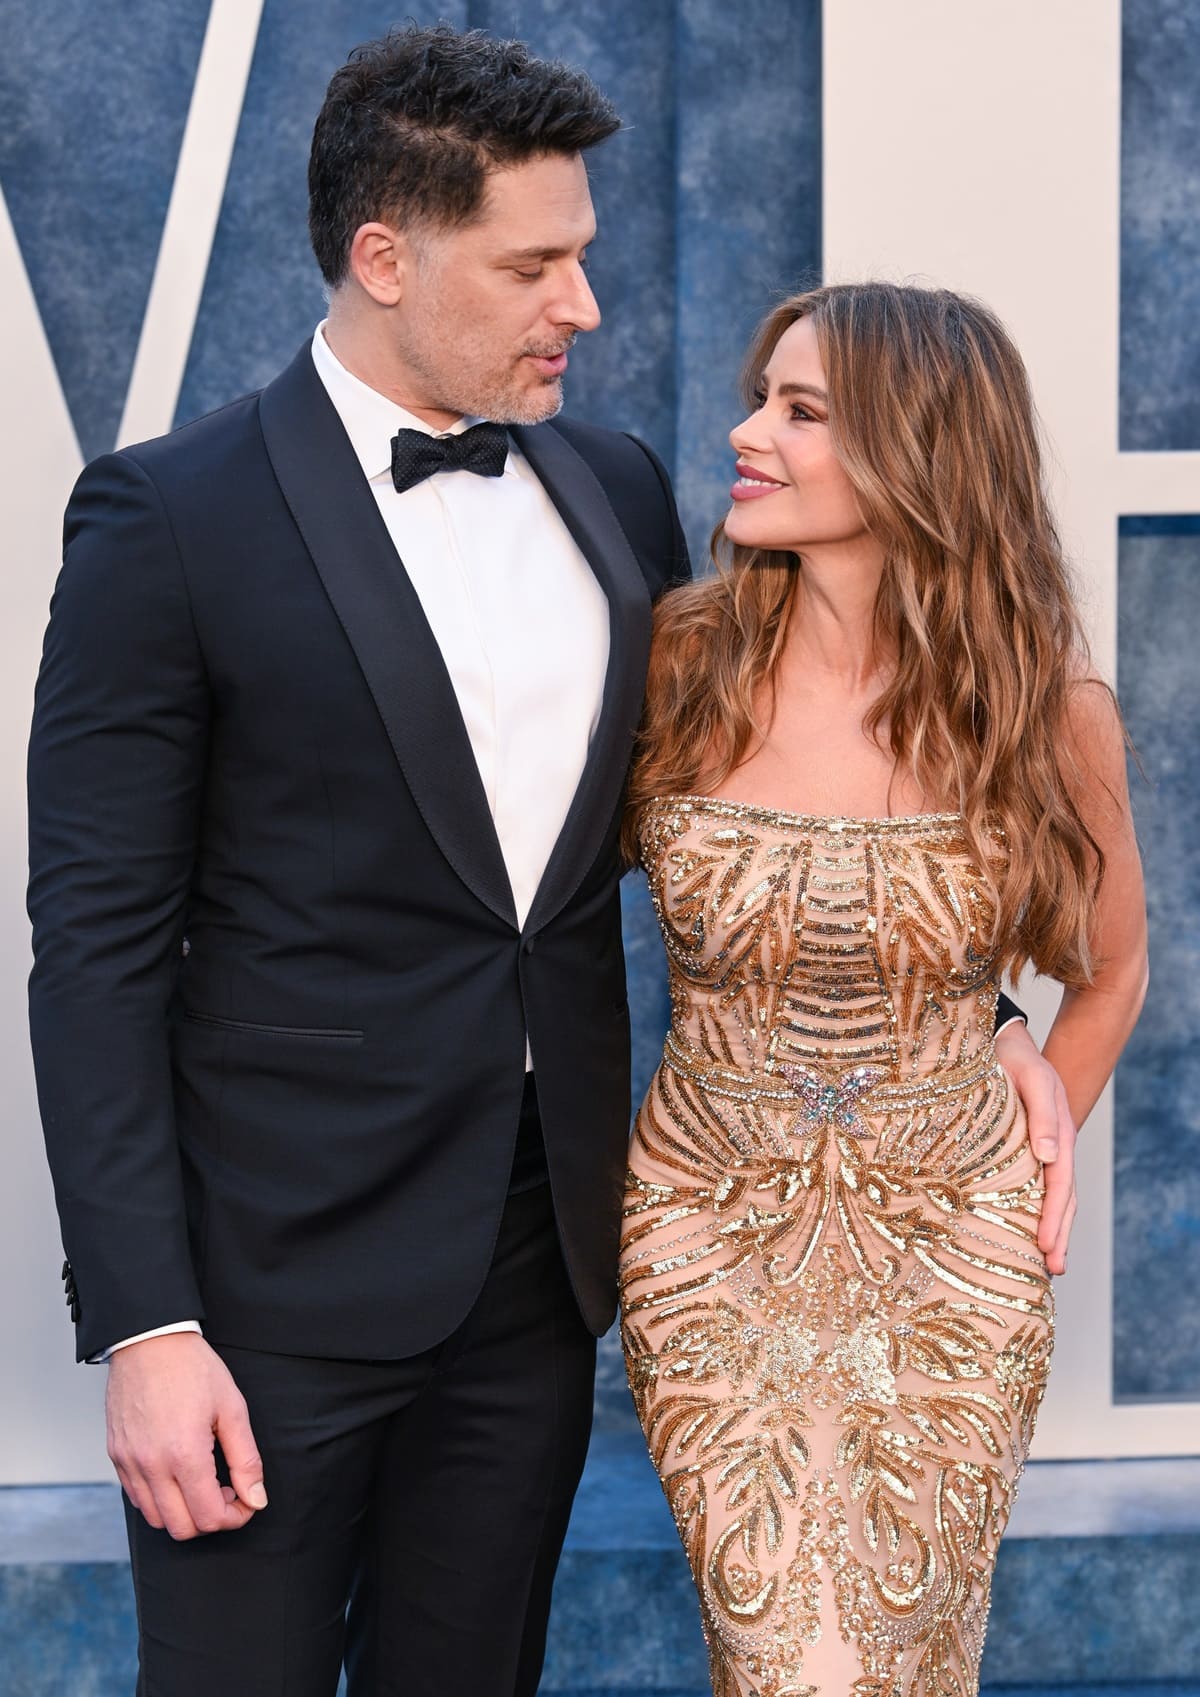 Joe Manganiello and Sofía Vergara couldn't help but show their affection for each other at the 2023 Vanity Fair Oscar Party